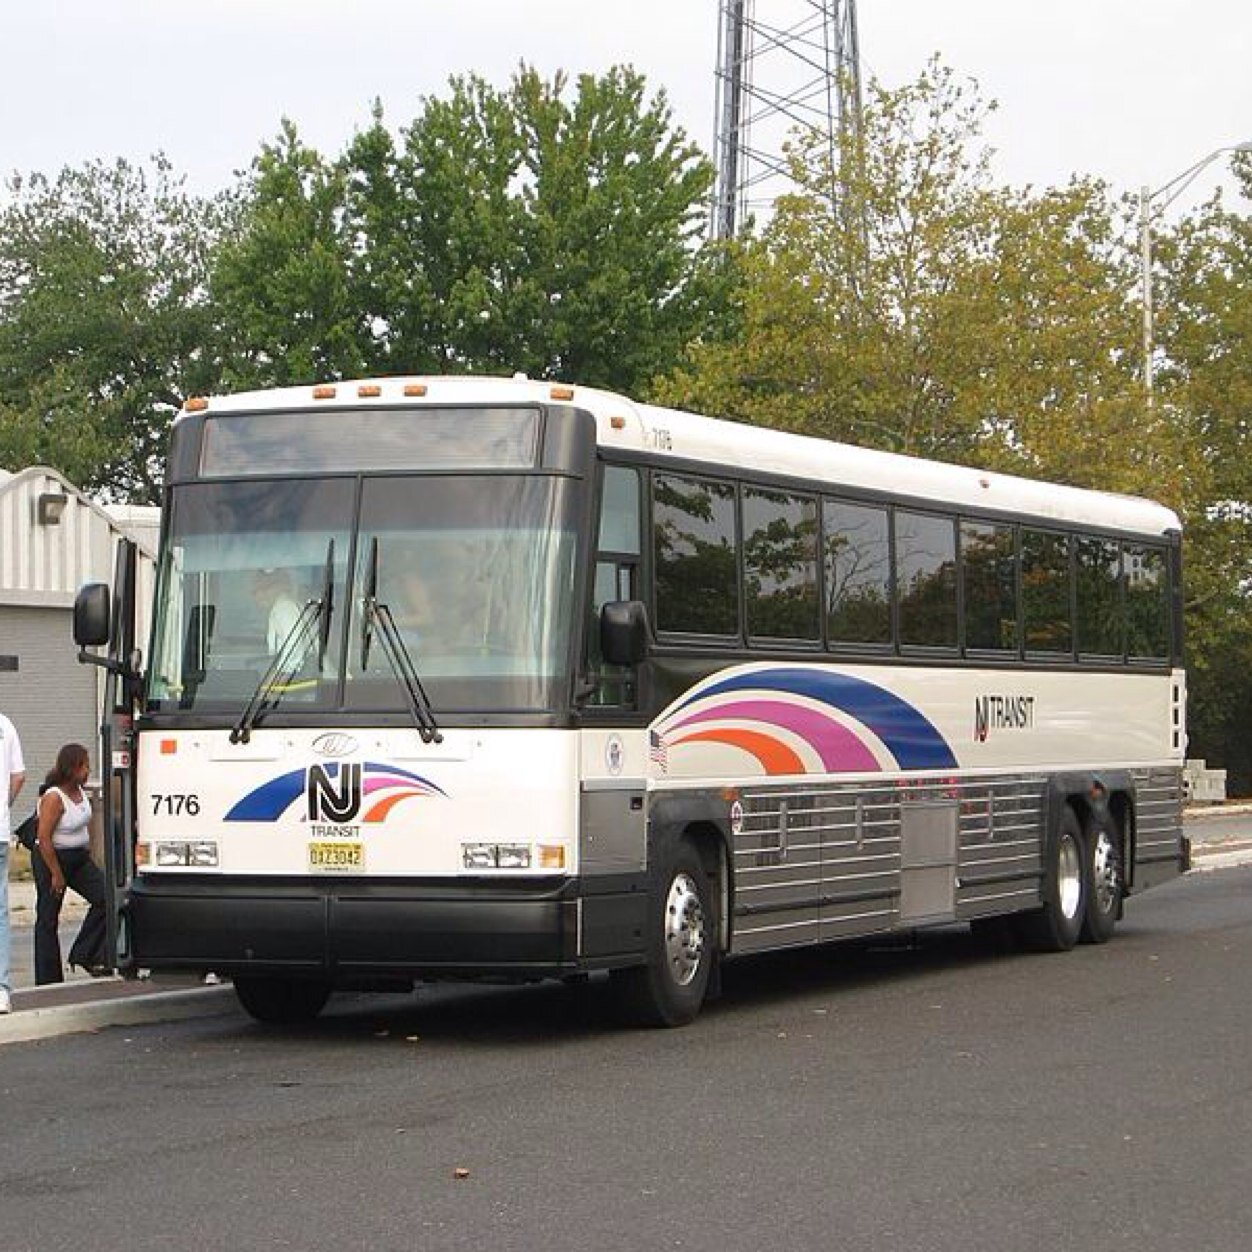 I enjoy taking the NJ Transit Bus or Train to work almost every day. What a joy!